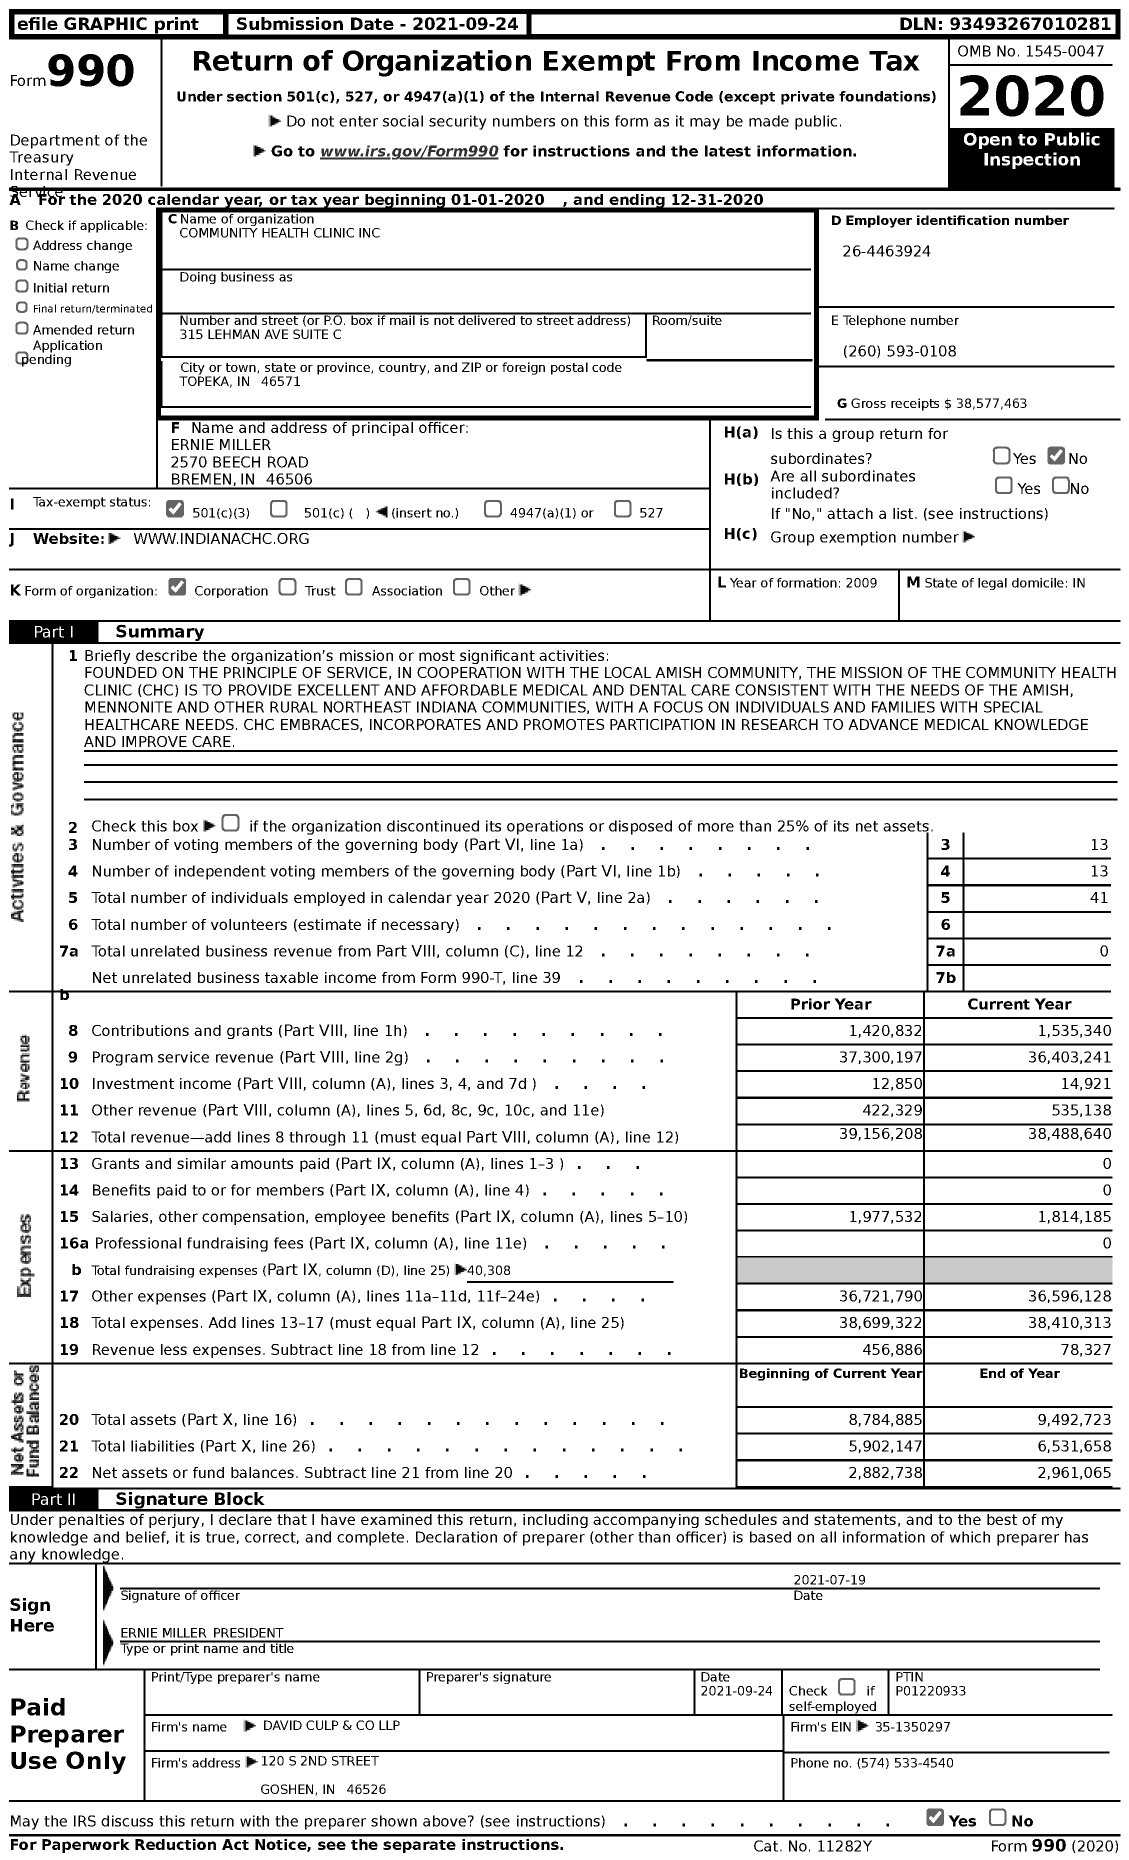 Image of first page of 2020 Form 990 for Community Health Clinic (CHC)